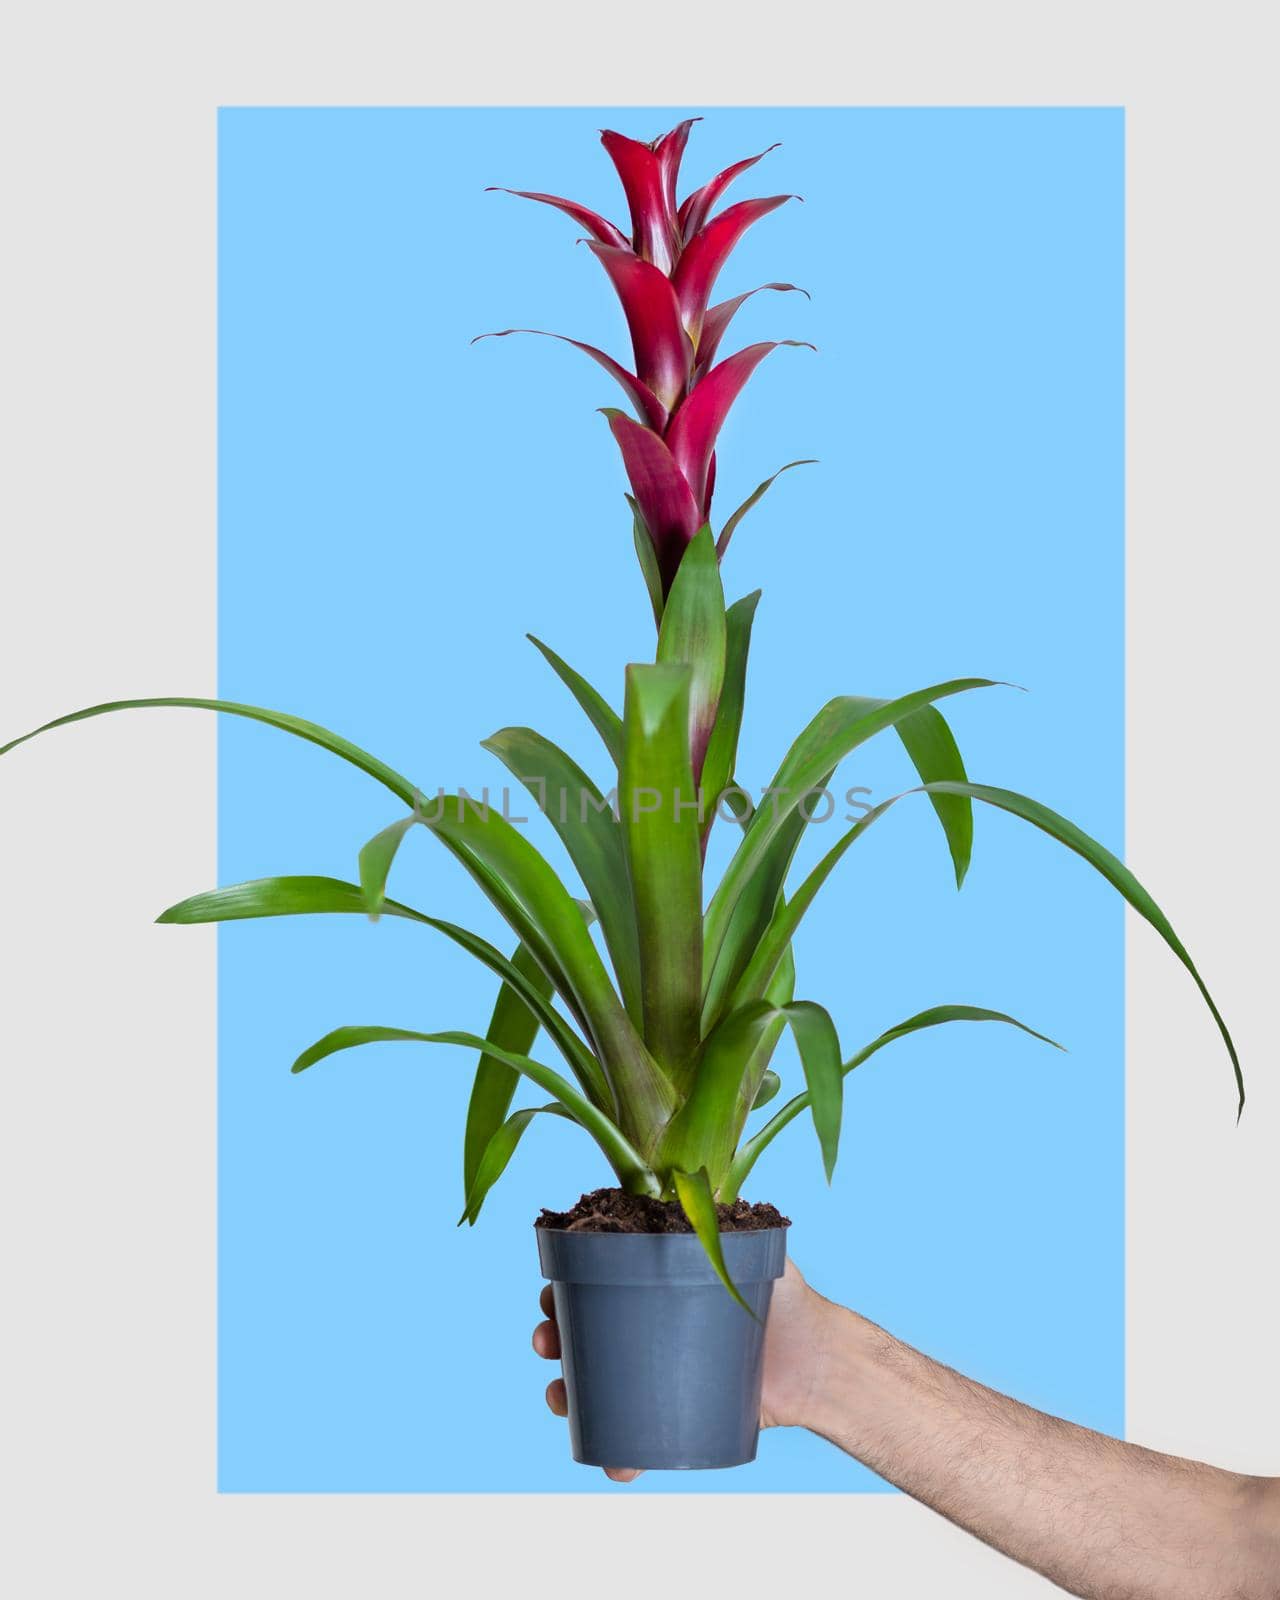 Holding Red Bromeliaceae, monocot flowering plant in blue background by ferhad